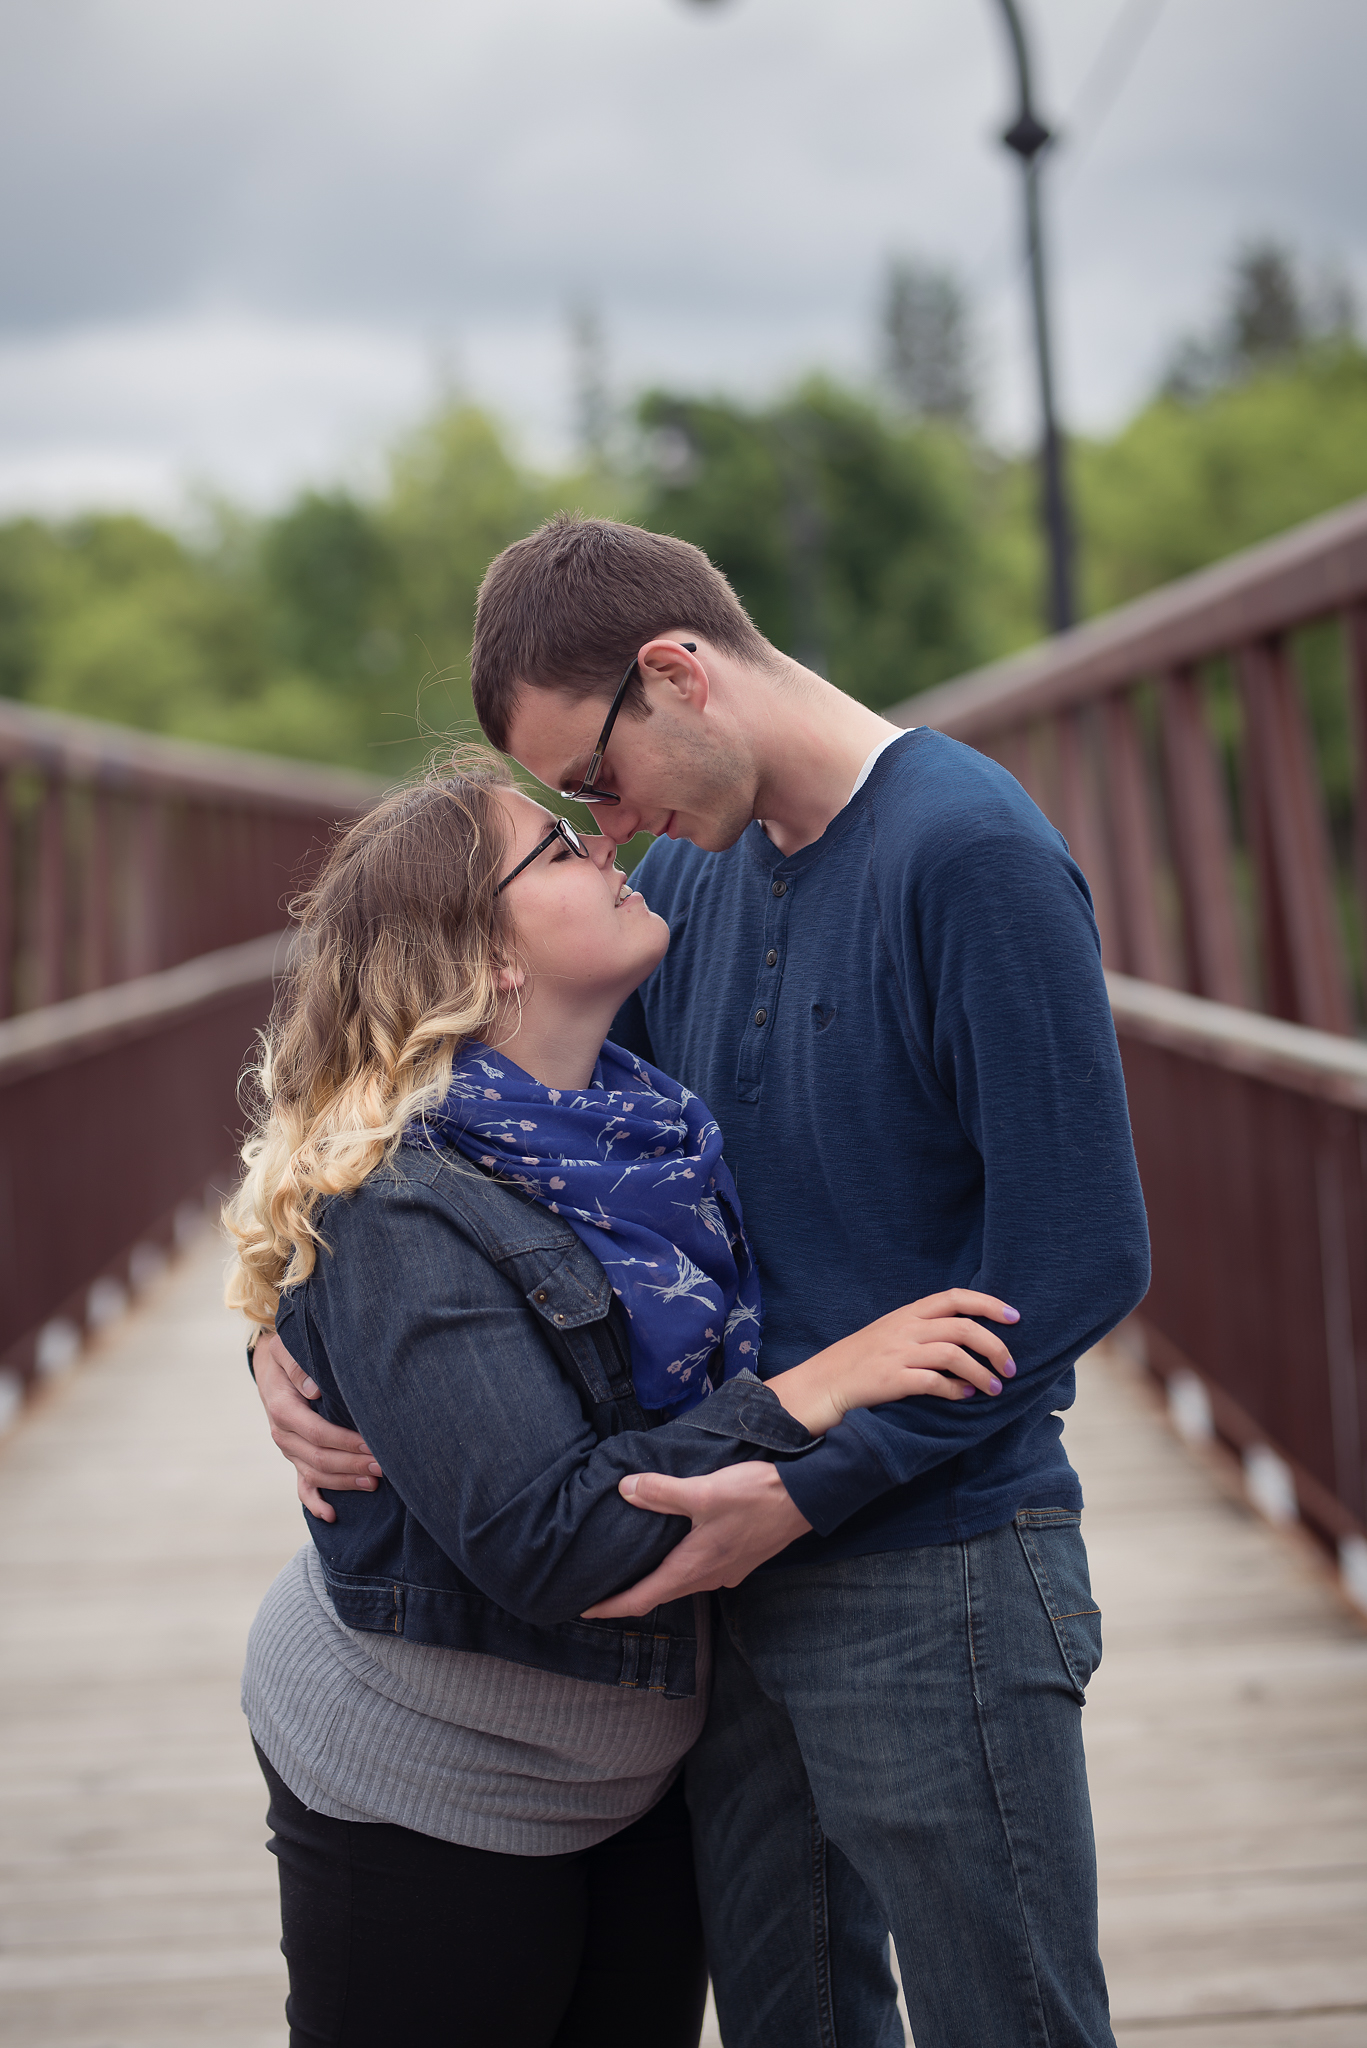 Couples73NaomiLuciennePhotography062018-2-Edit.jpg